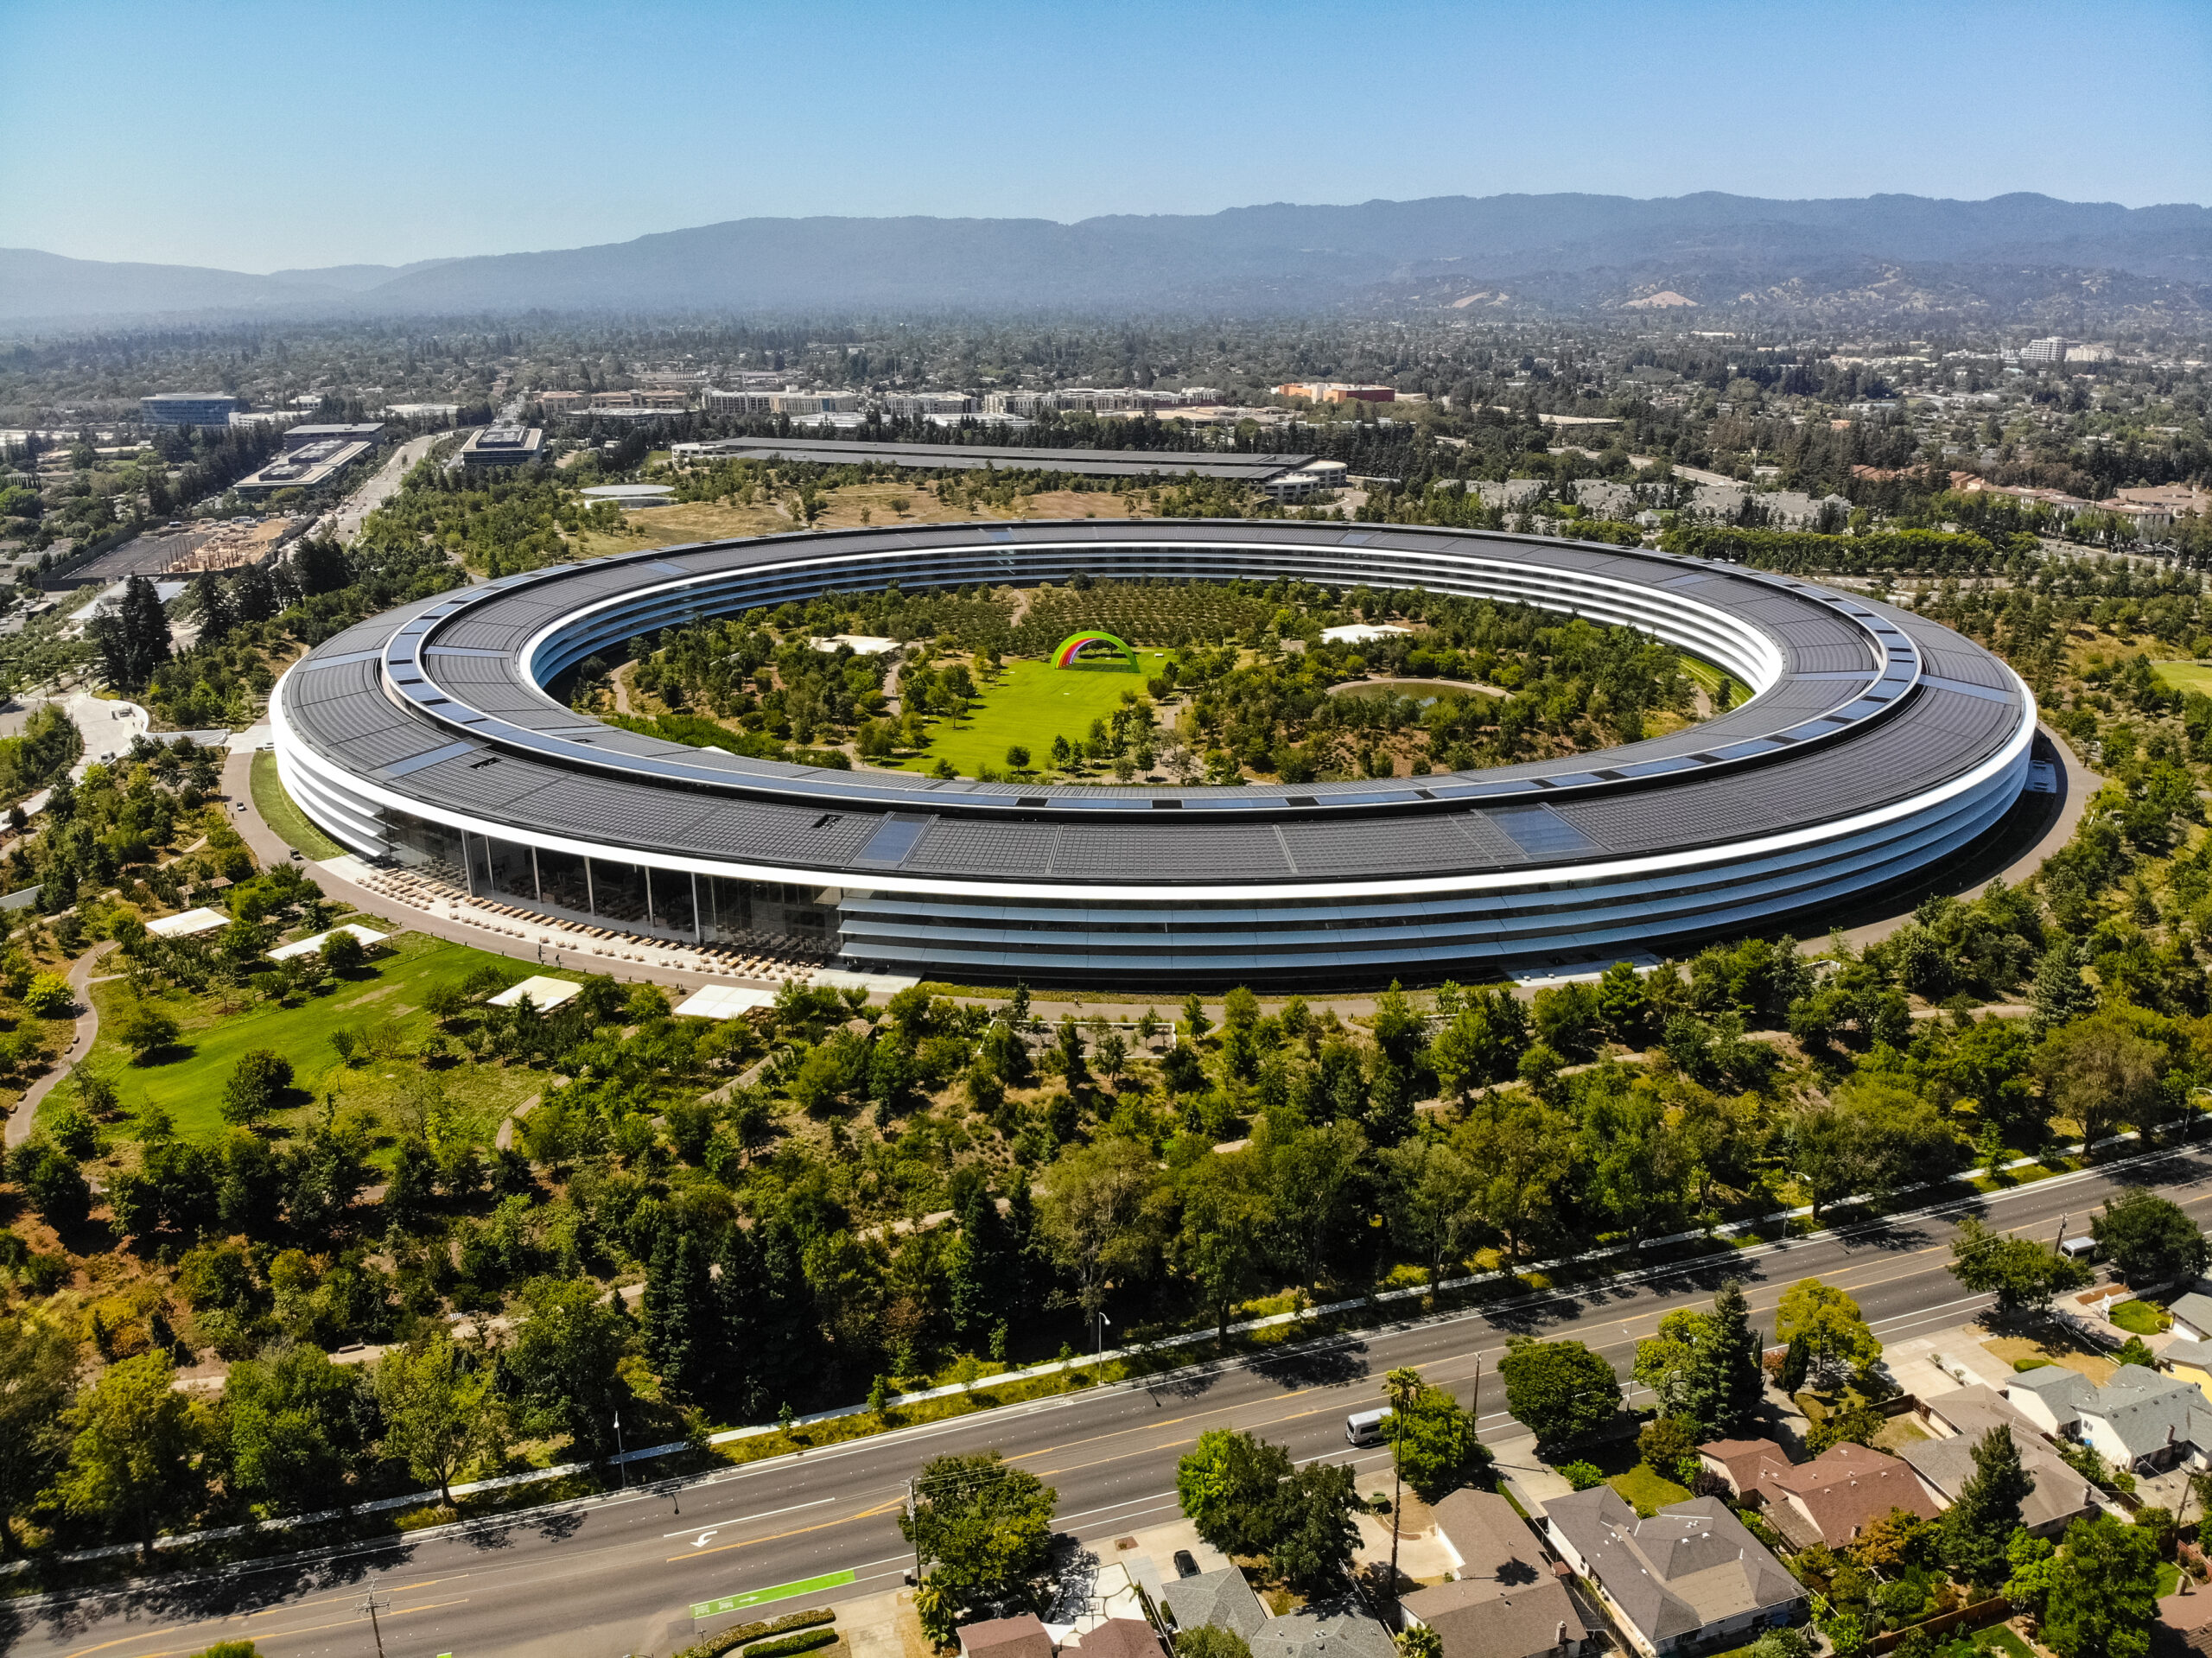 An aerial view of Apple Part in Sunnyvale, California. A ring of indoor space surrounds an enclosed green and forest